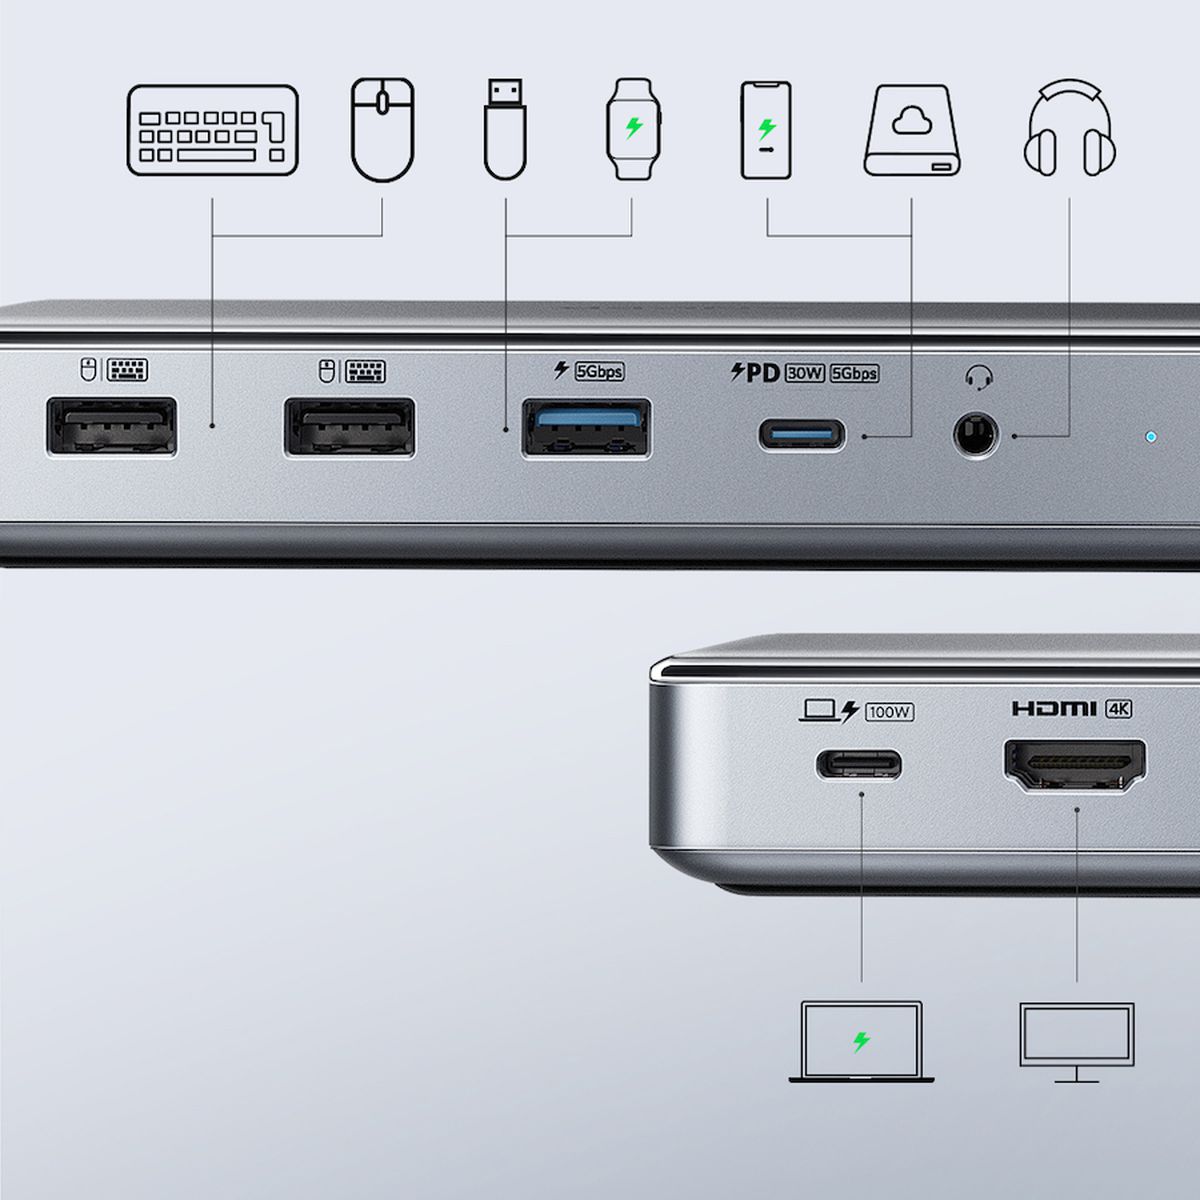 Anker 675 USB-C Docking Station gives you up to 100 watts from its